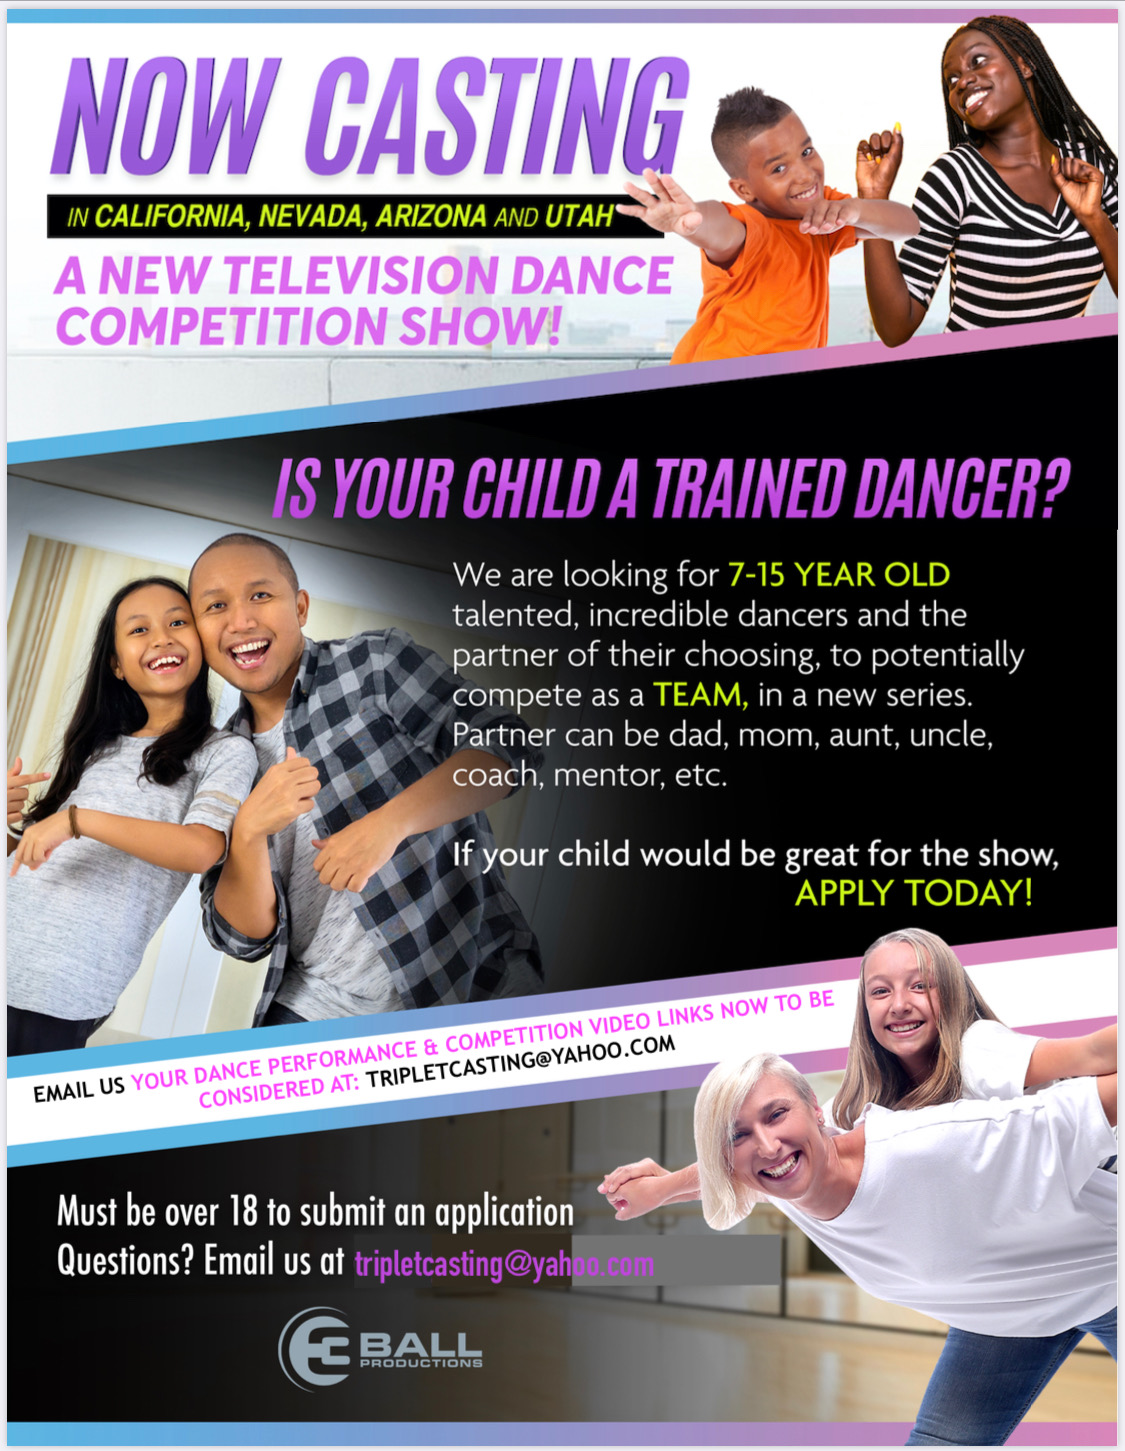 Auditions for Kids in Utah, Nevada, Arizona and California for New Kids